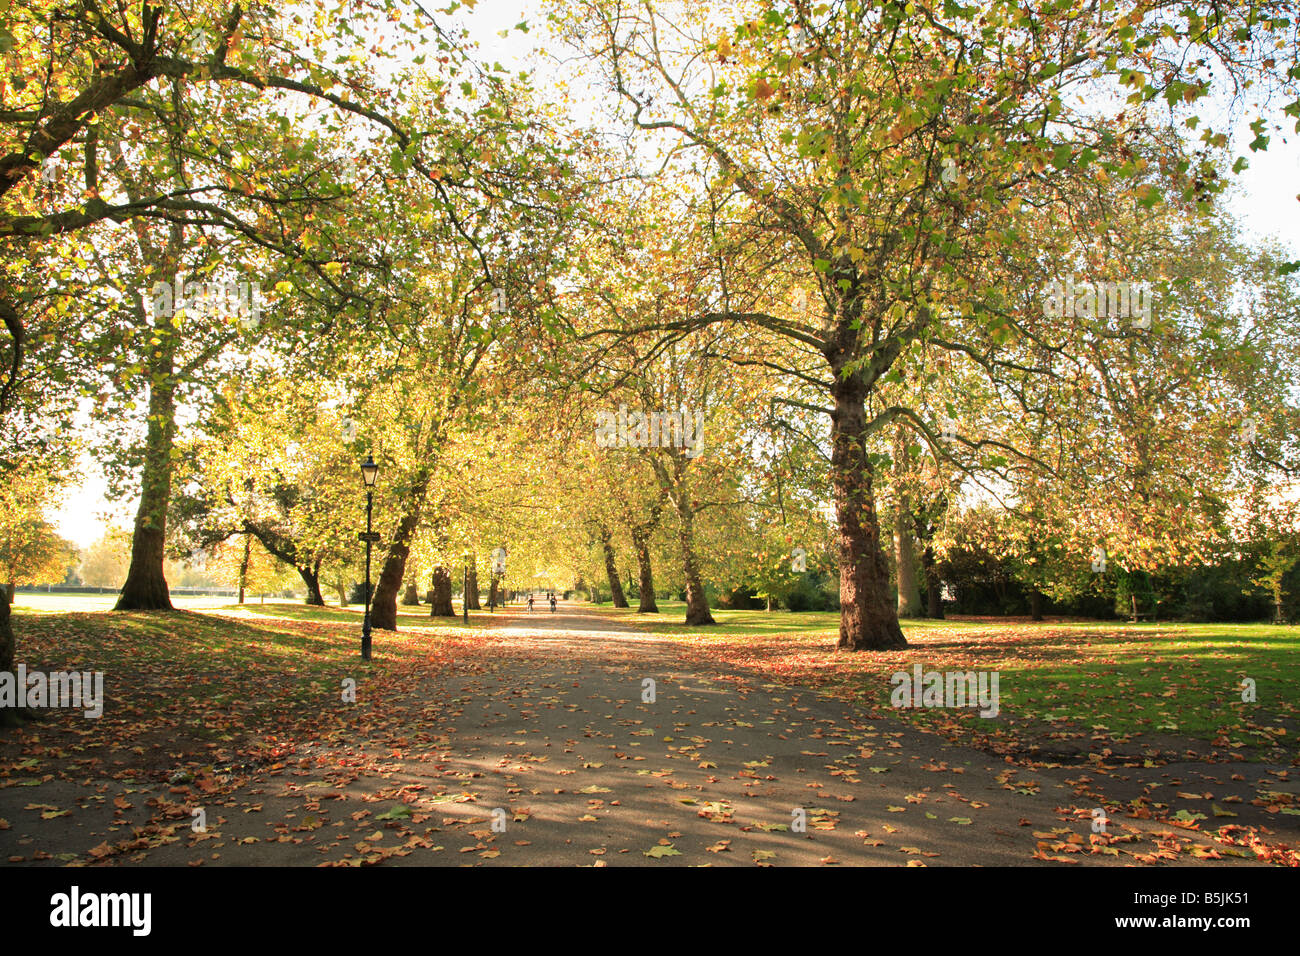 A view towards the bandstand in Battersea Park one October day Stock Photo